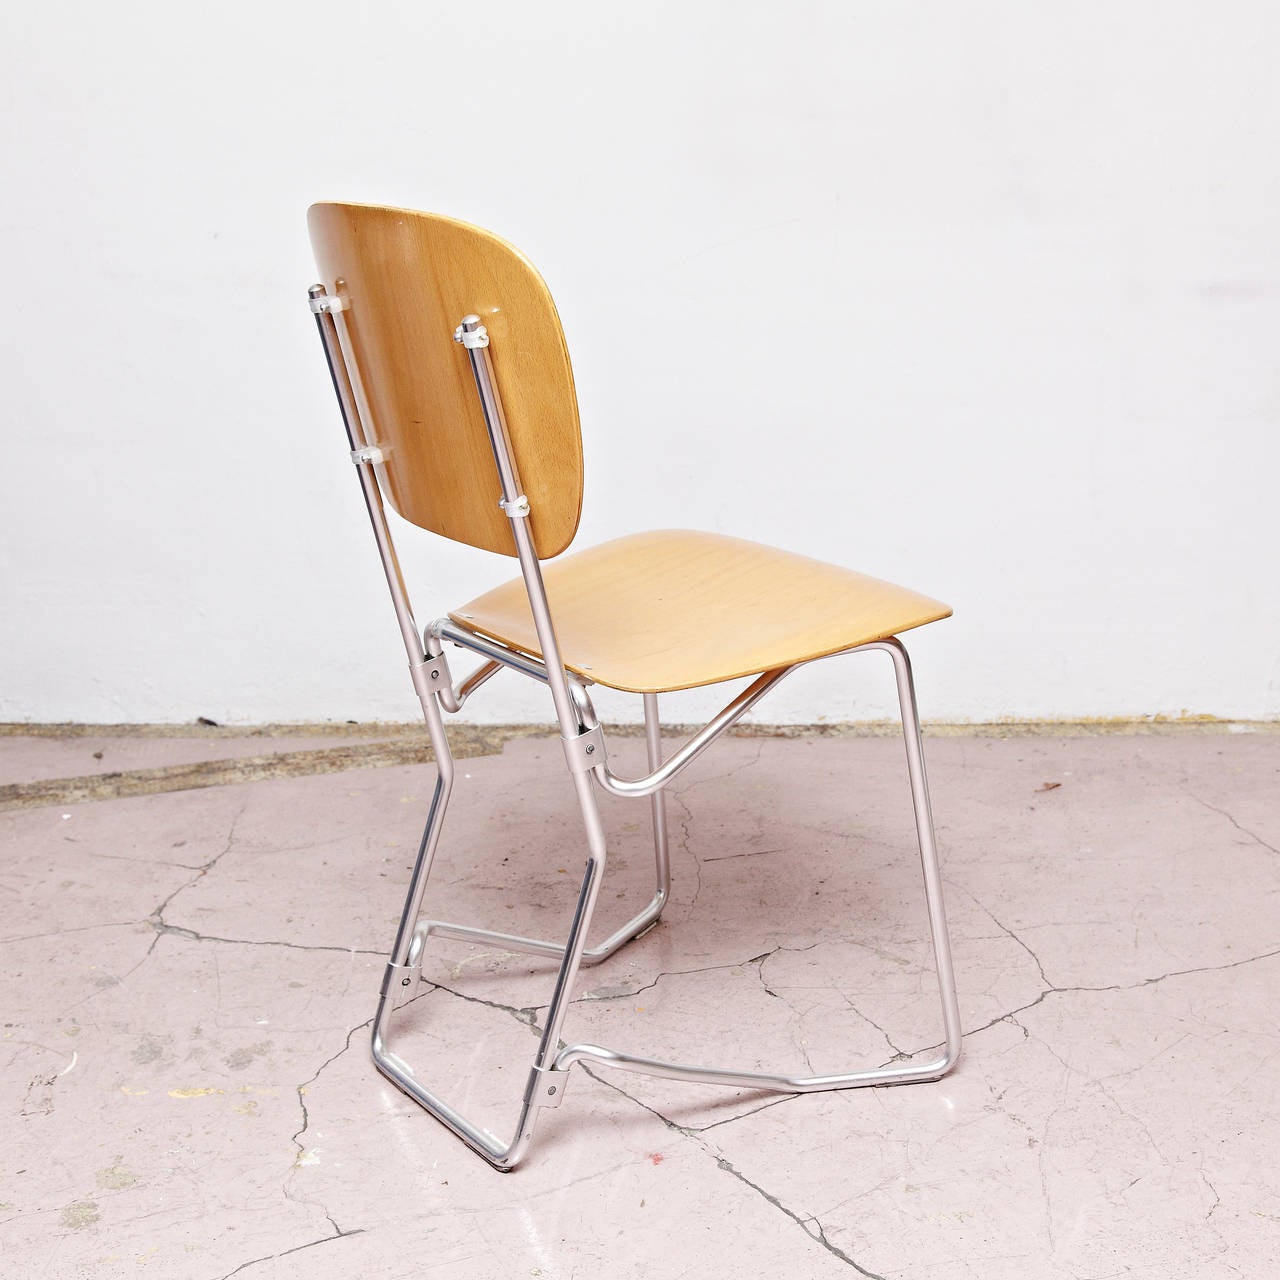 Stackable Aluflex chairs designed by Armin Wirth.
Manufactured by Aluflex, Switzerland, circa 1950. 

Metal and plywood.

In good original condition, with minor wear consistent with age and use, preserving a beautiful patina.

4 chairs